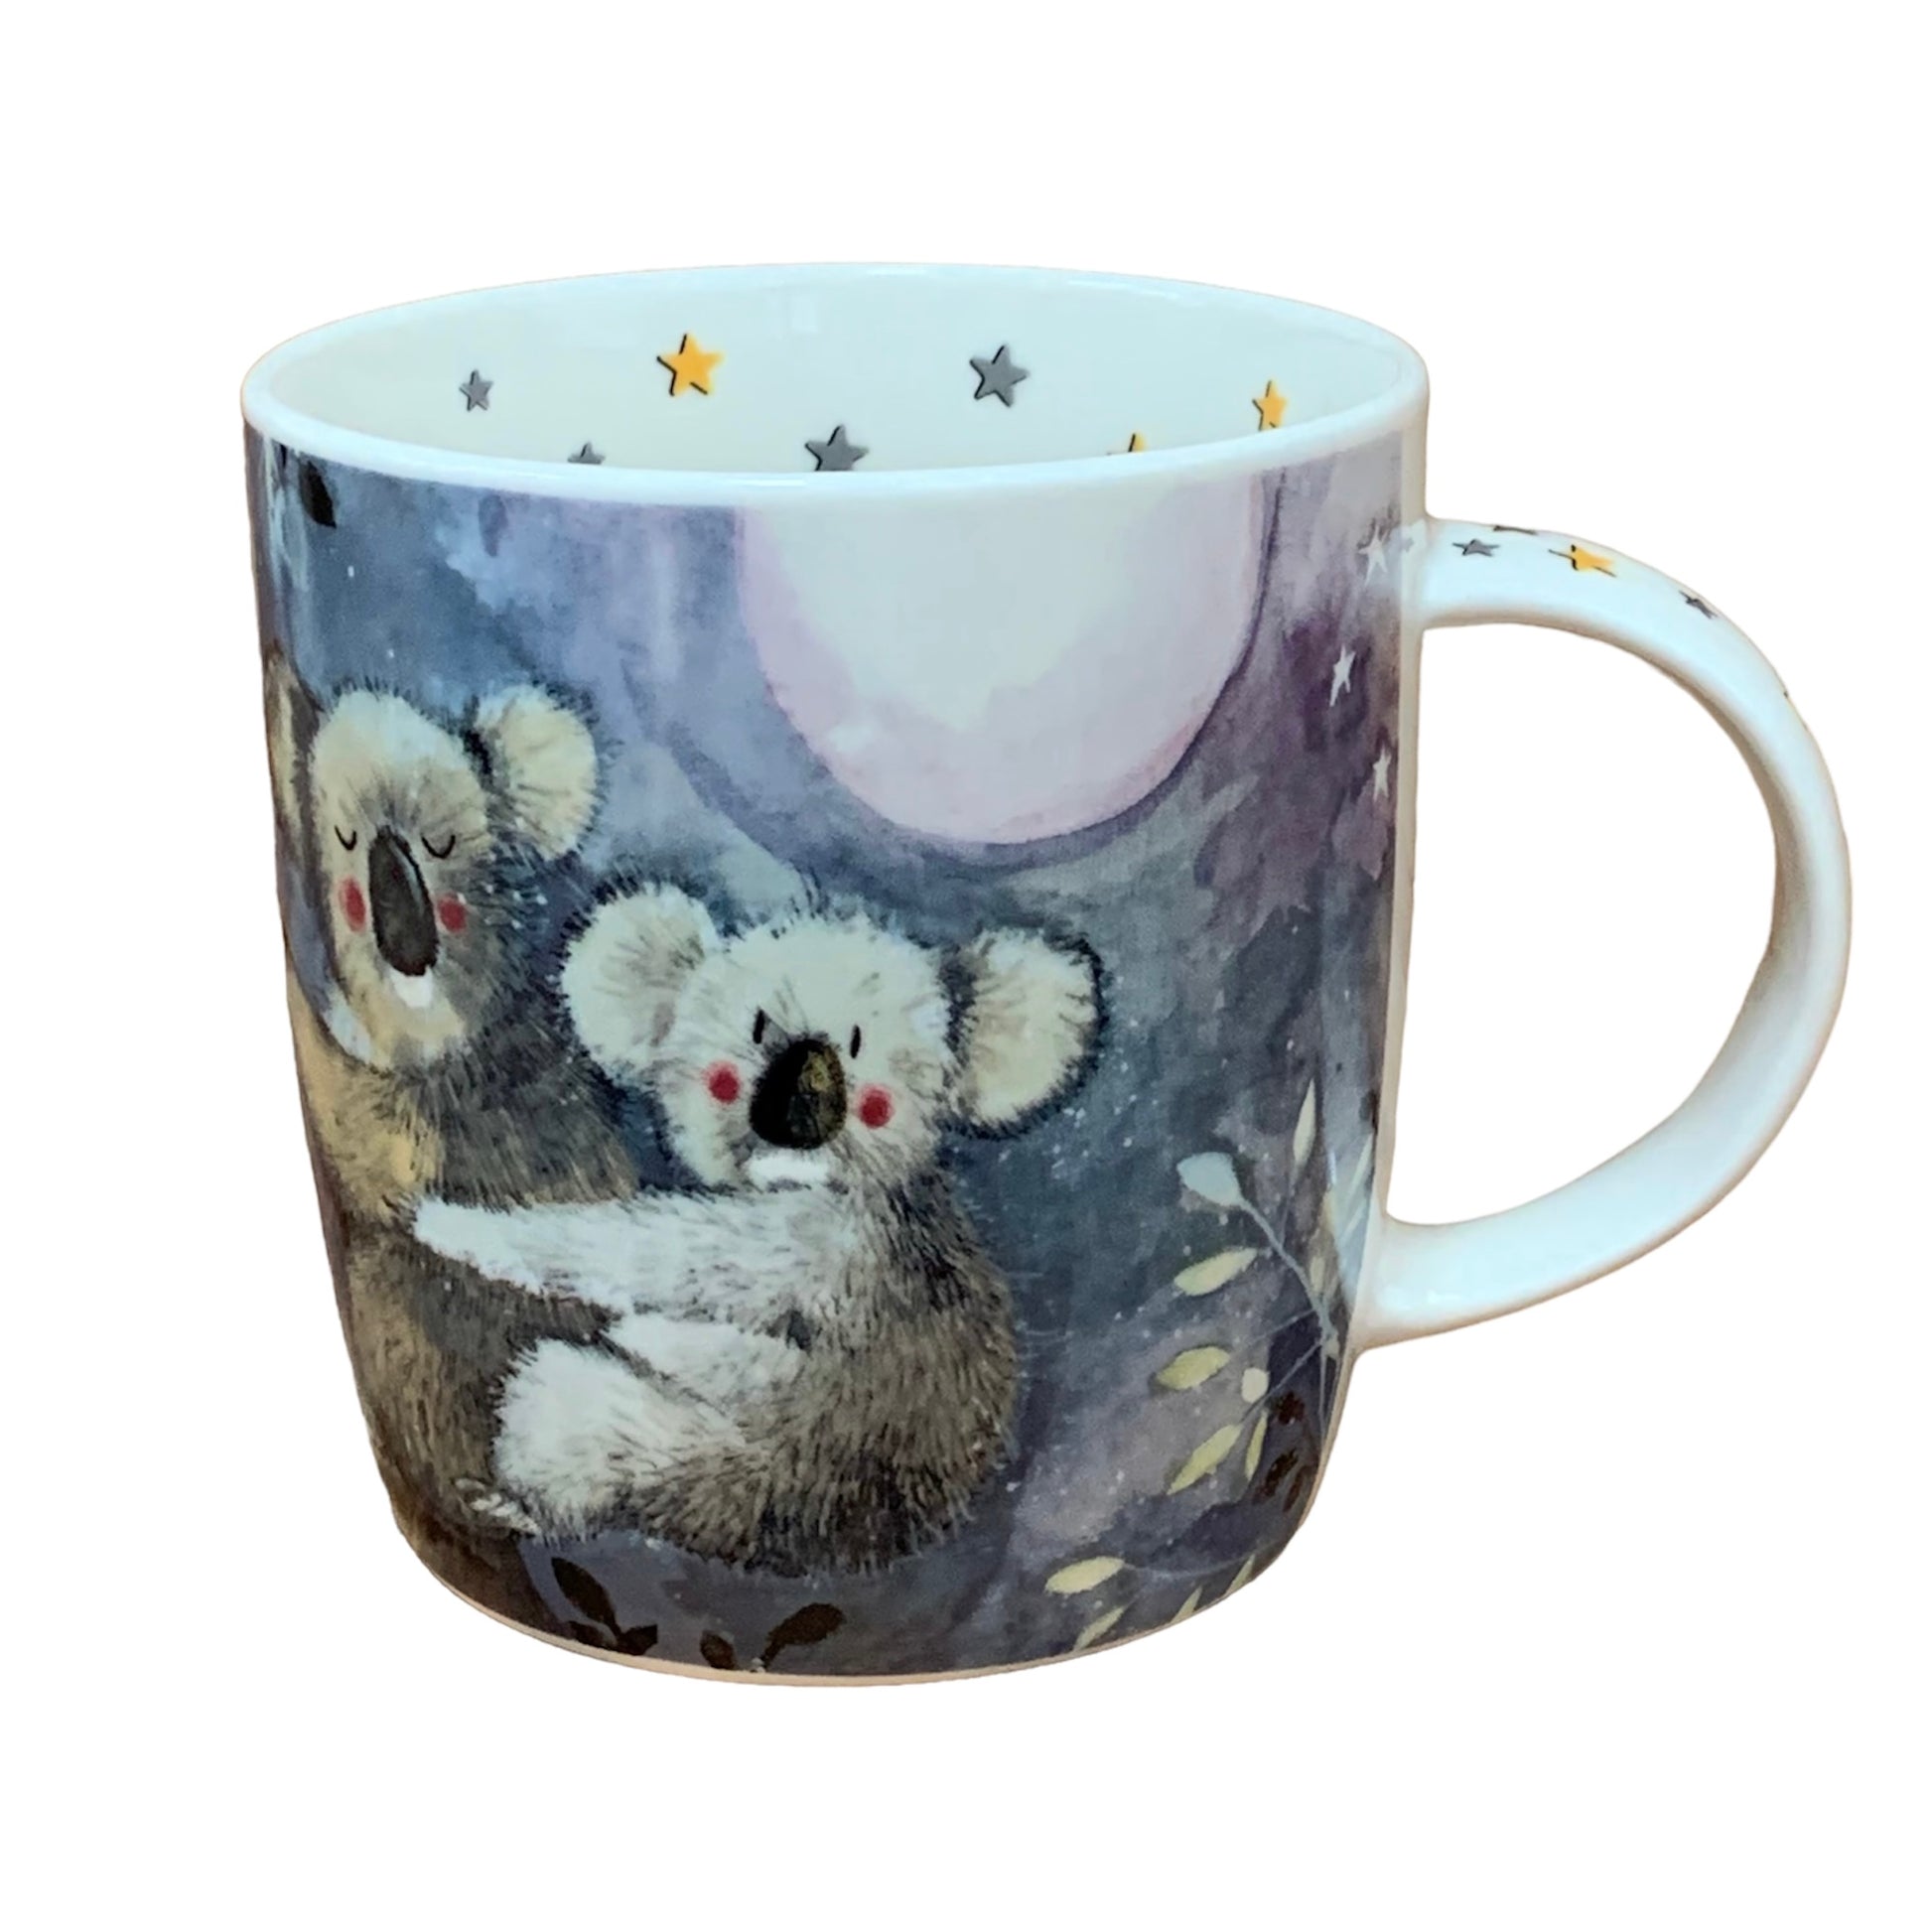 Alex Clark mug is illustrated with a mother & baby Koalas in their habitat.  This mug also features star illustrations around the inside rim & down the handle. 